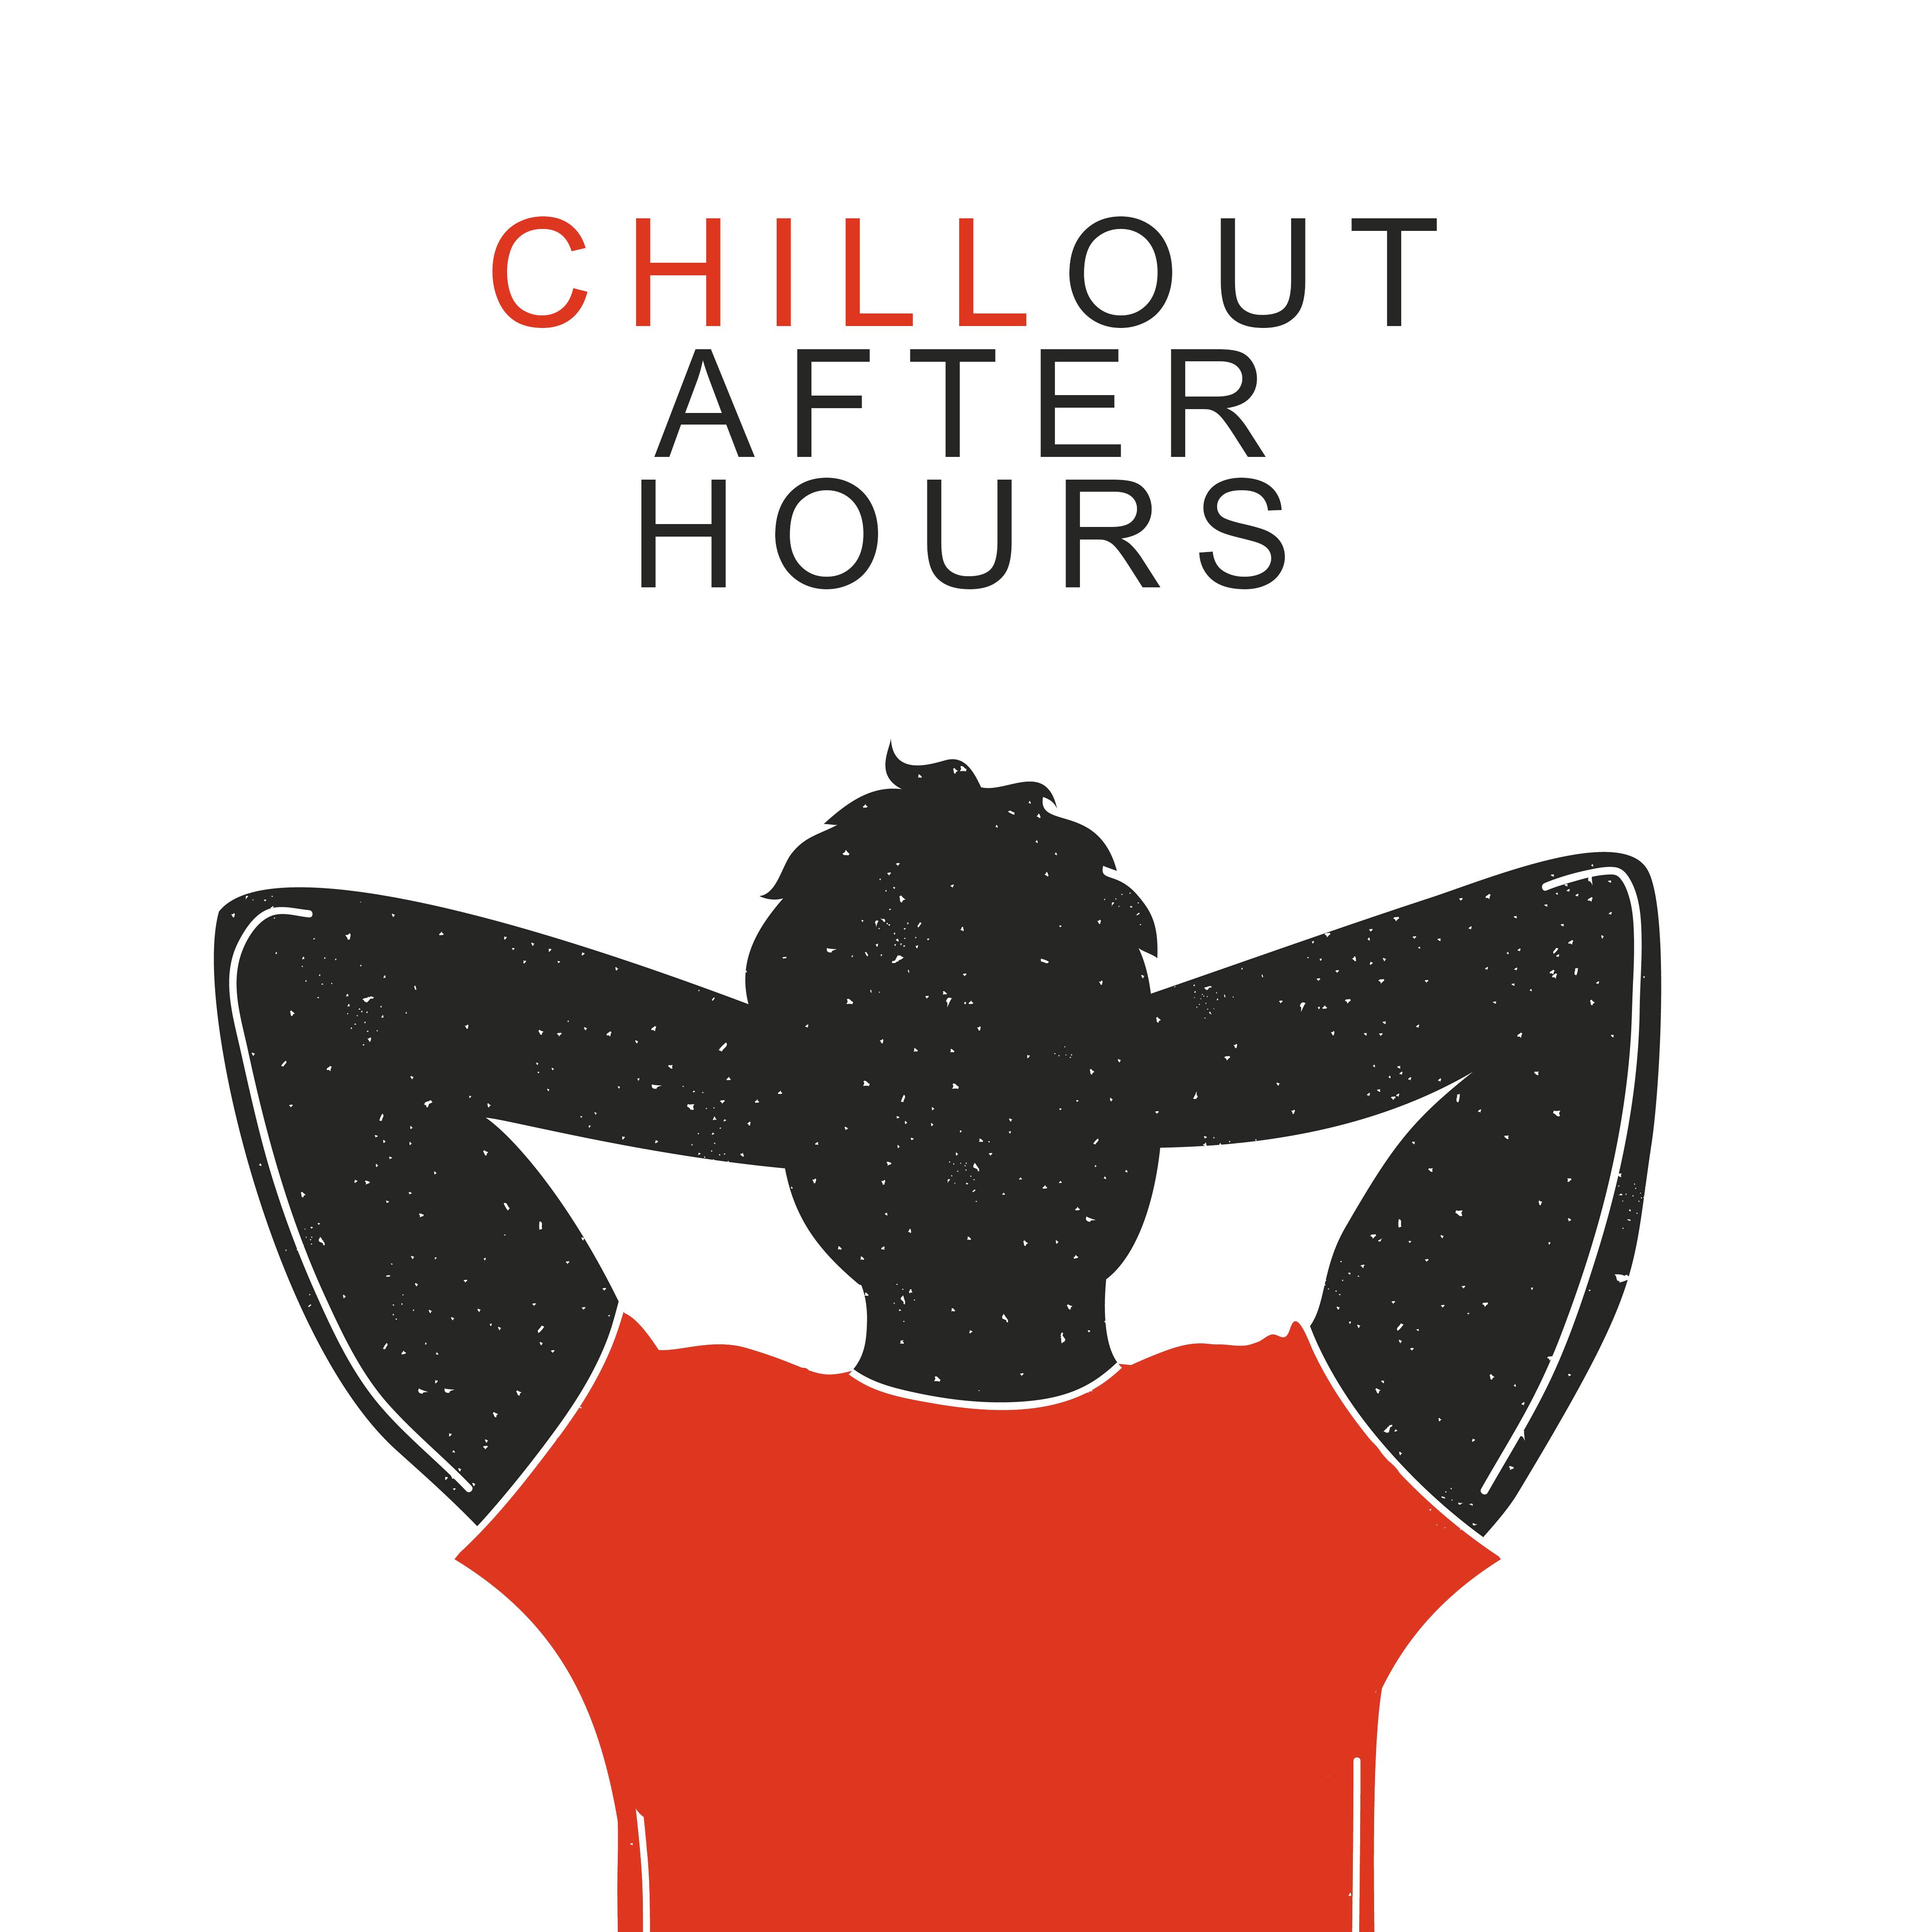 Chillout After Hours - 15 Deeply Relaxing Chillout Songs for Chilling, Rest and Respite after a Day of Work